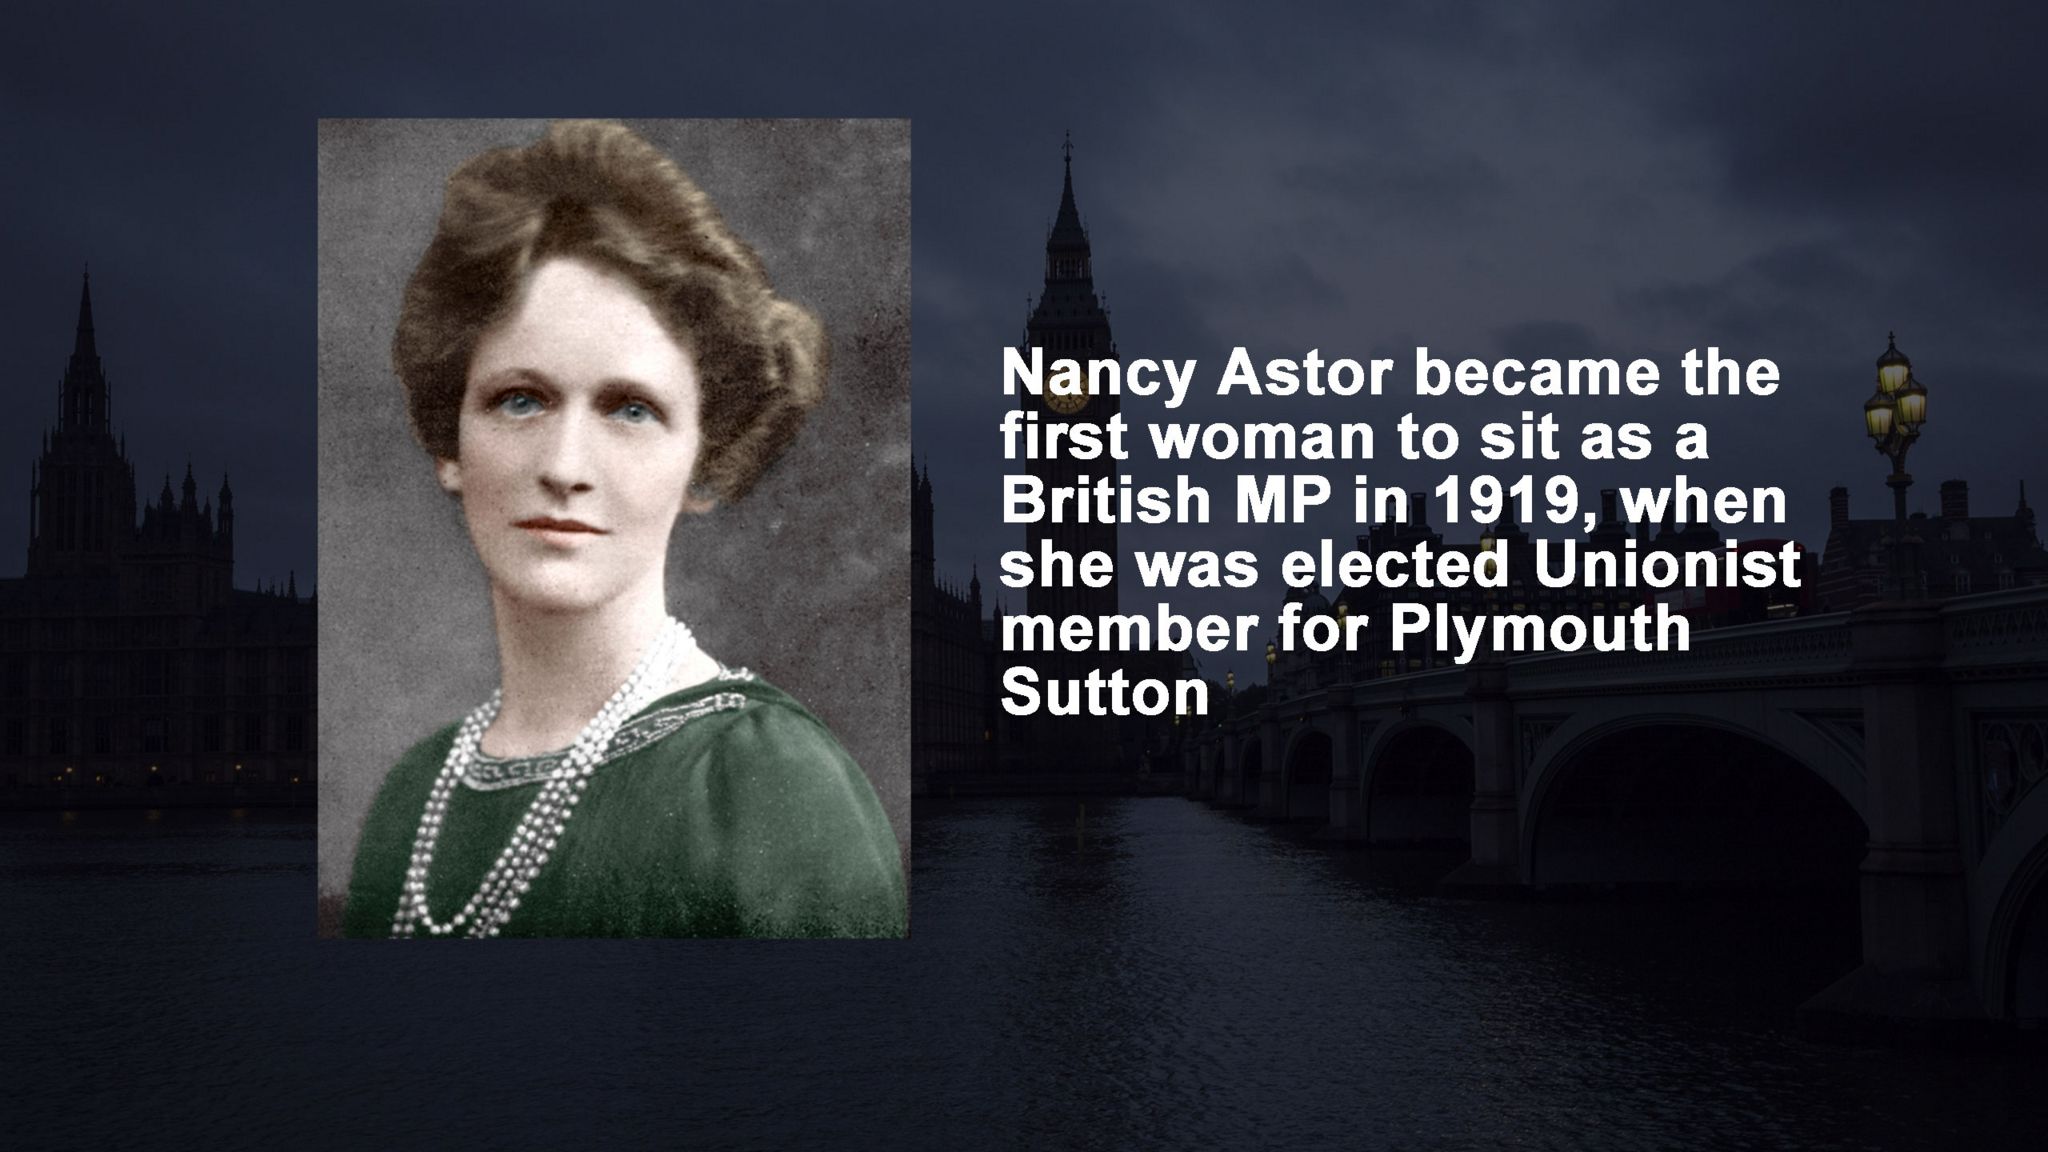 Reads: Nancy Astor became the first woman to sit as a British MP in 1919, when she was elected Unionist member for Plymouth Sutton